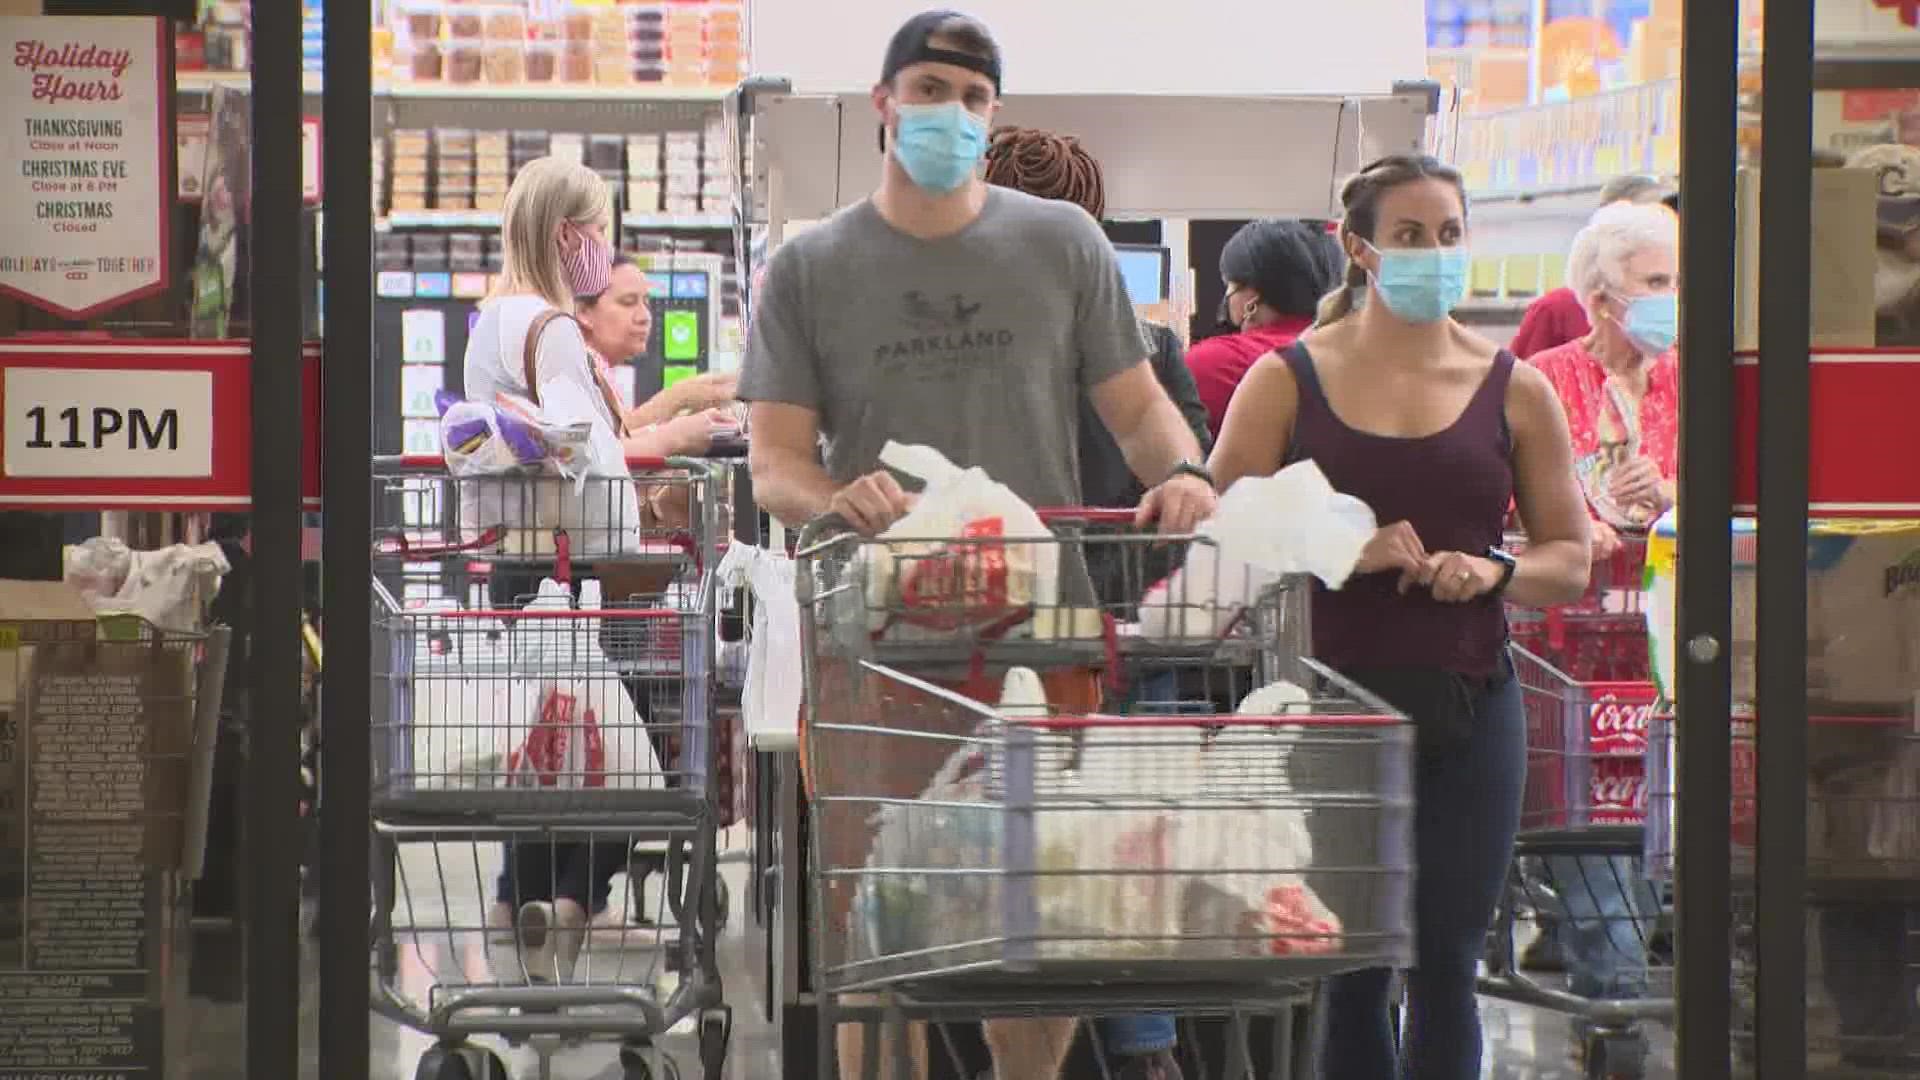 It was a huge surprise for H-E-B shoppers in the Heights Thursday. One of Texas’ most popular grocery chains surprised customers with free groceries.